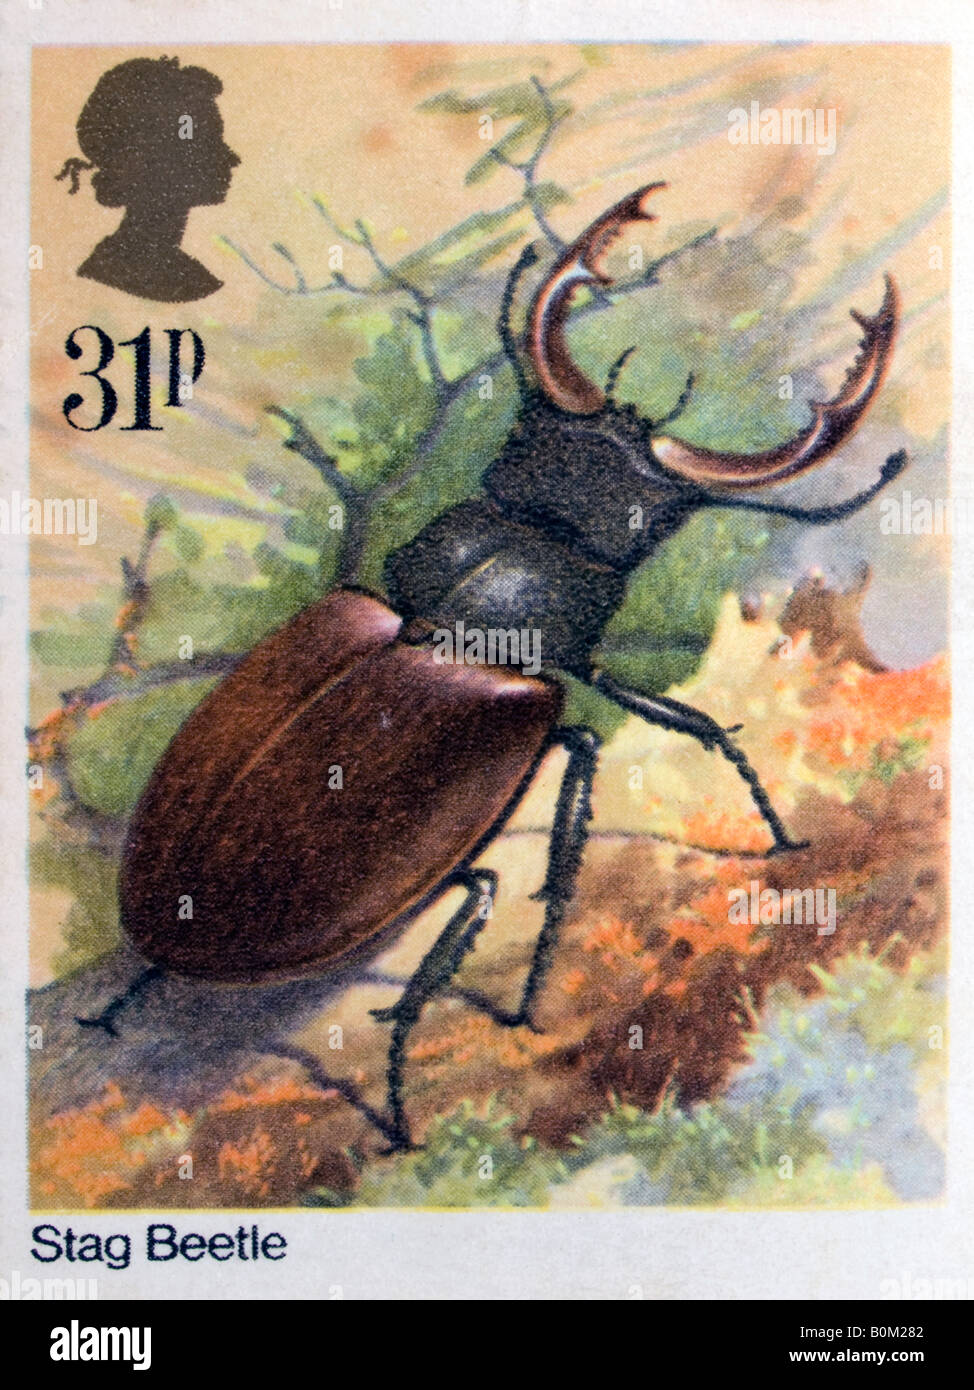 Stag beetle stamp Stock Photo